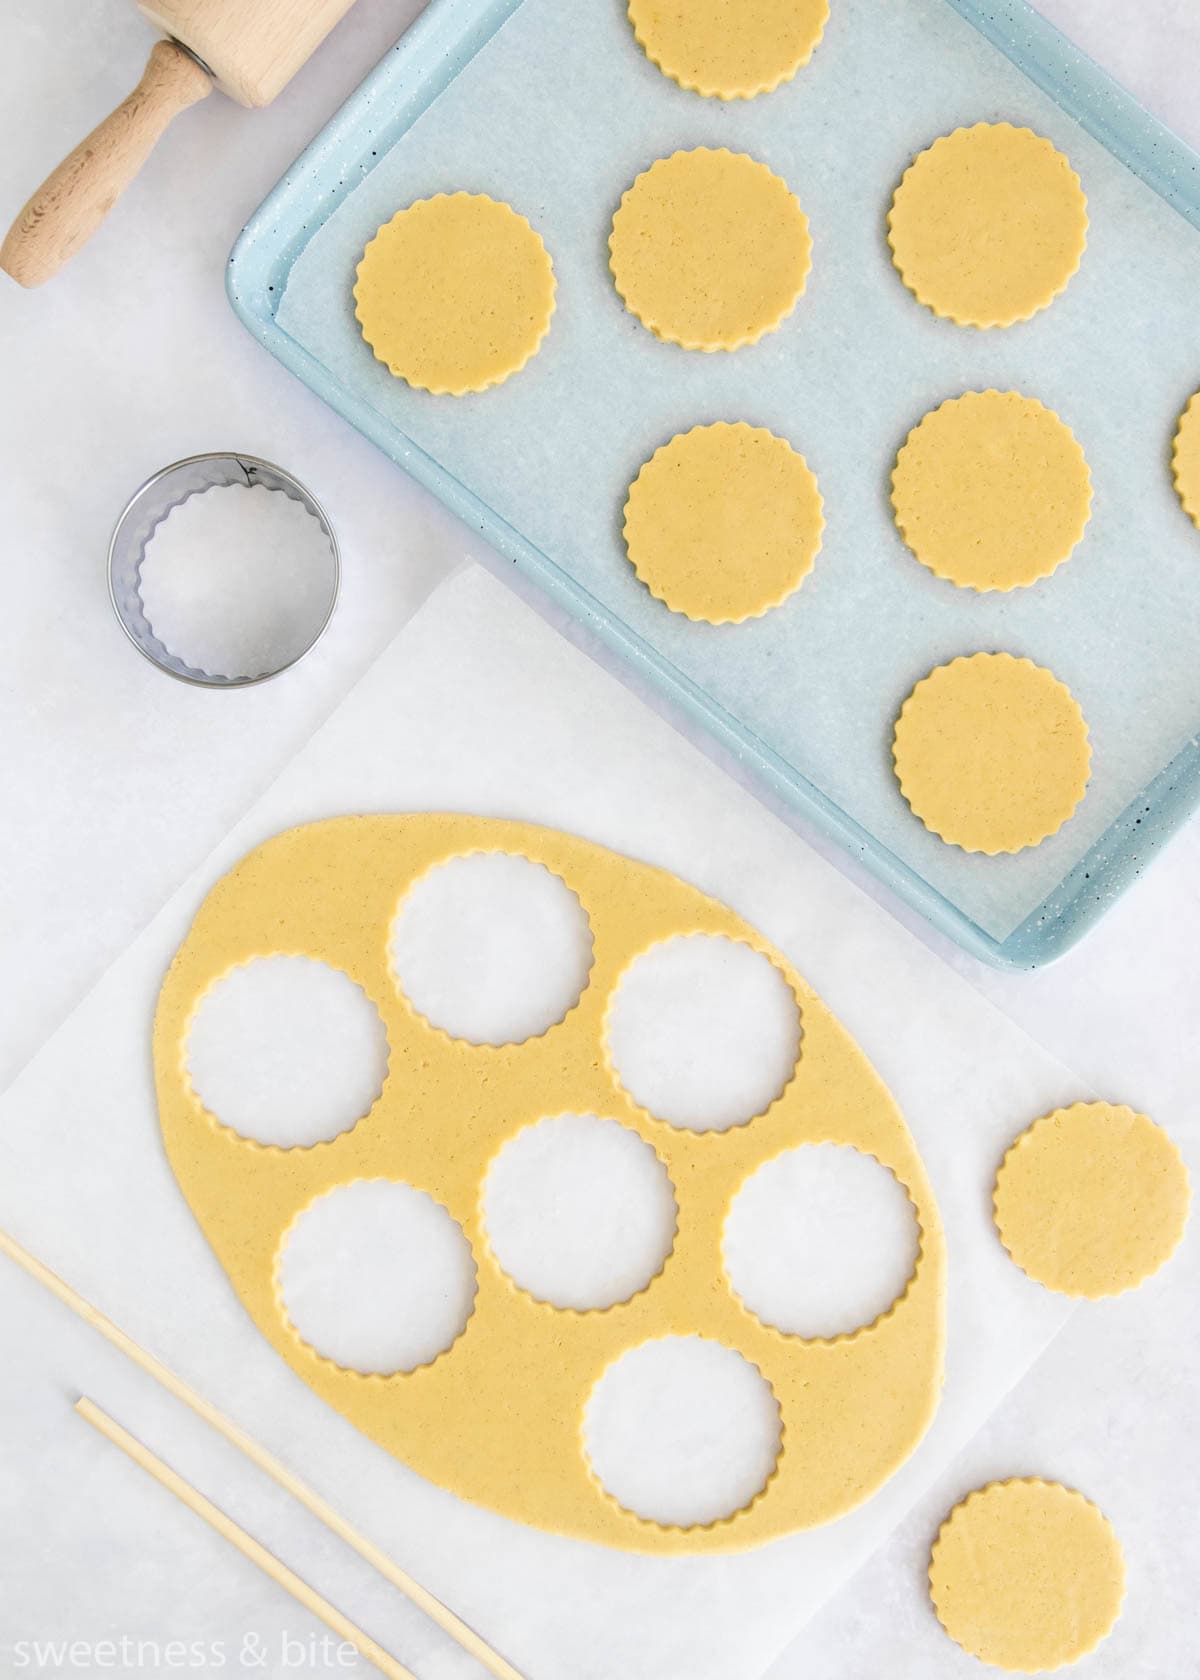 Rolled out cookie dough with scalloped circle shaped cookies cut out.